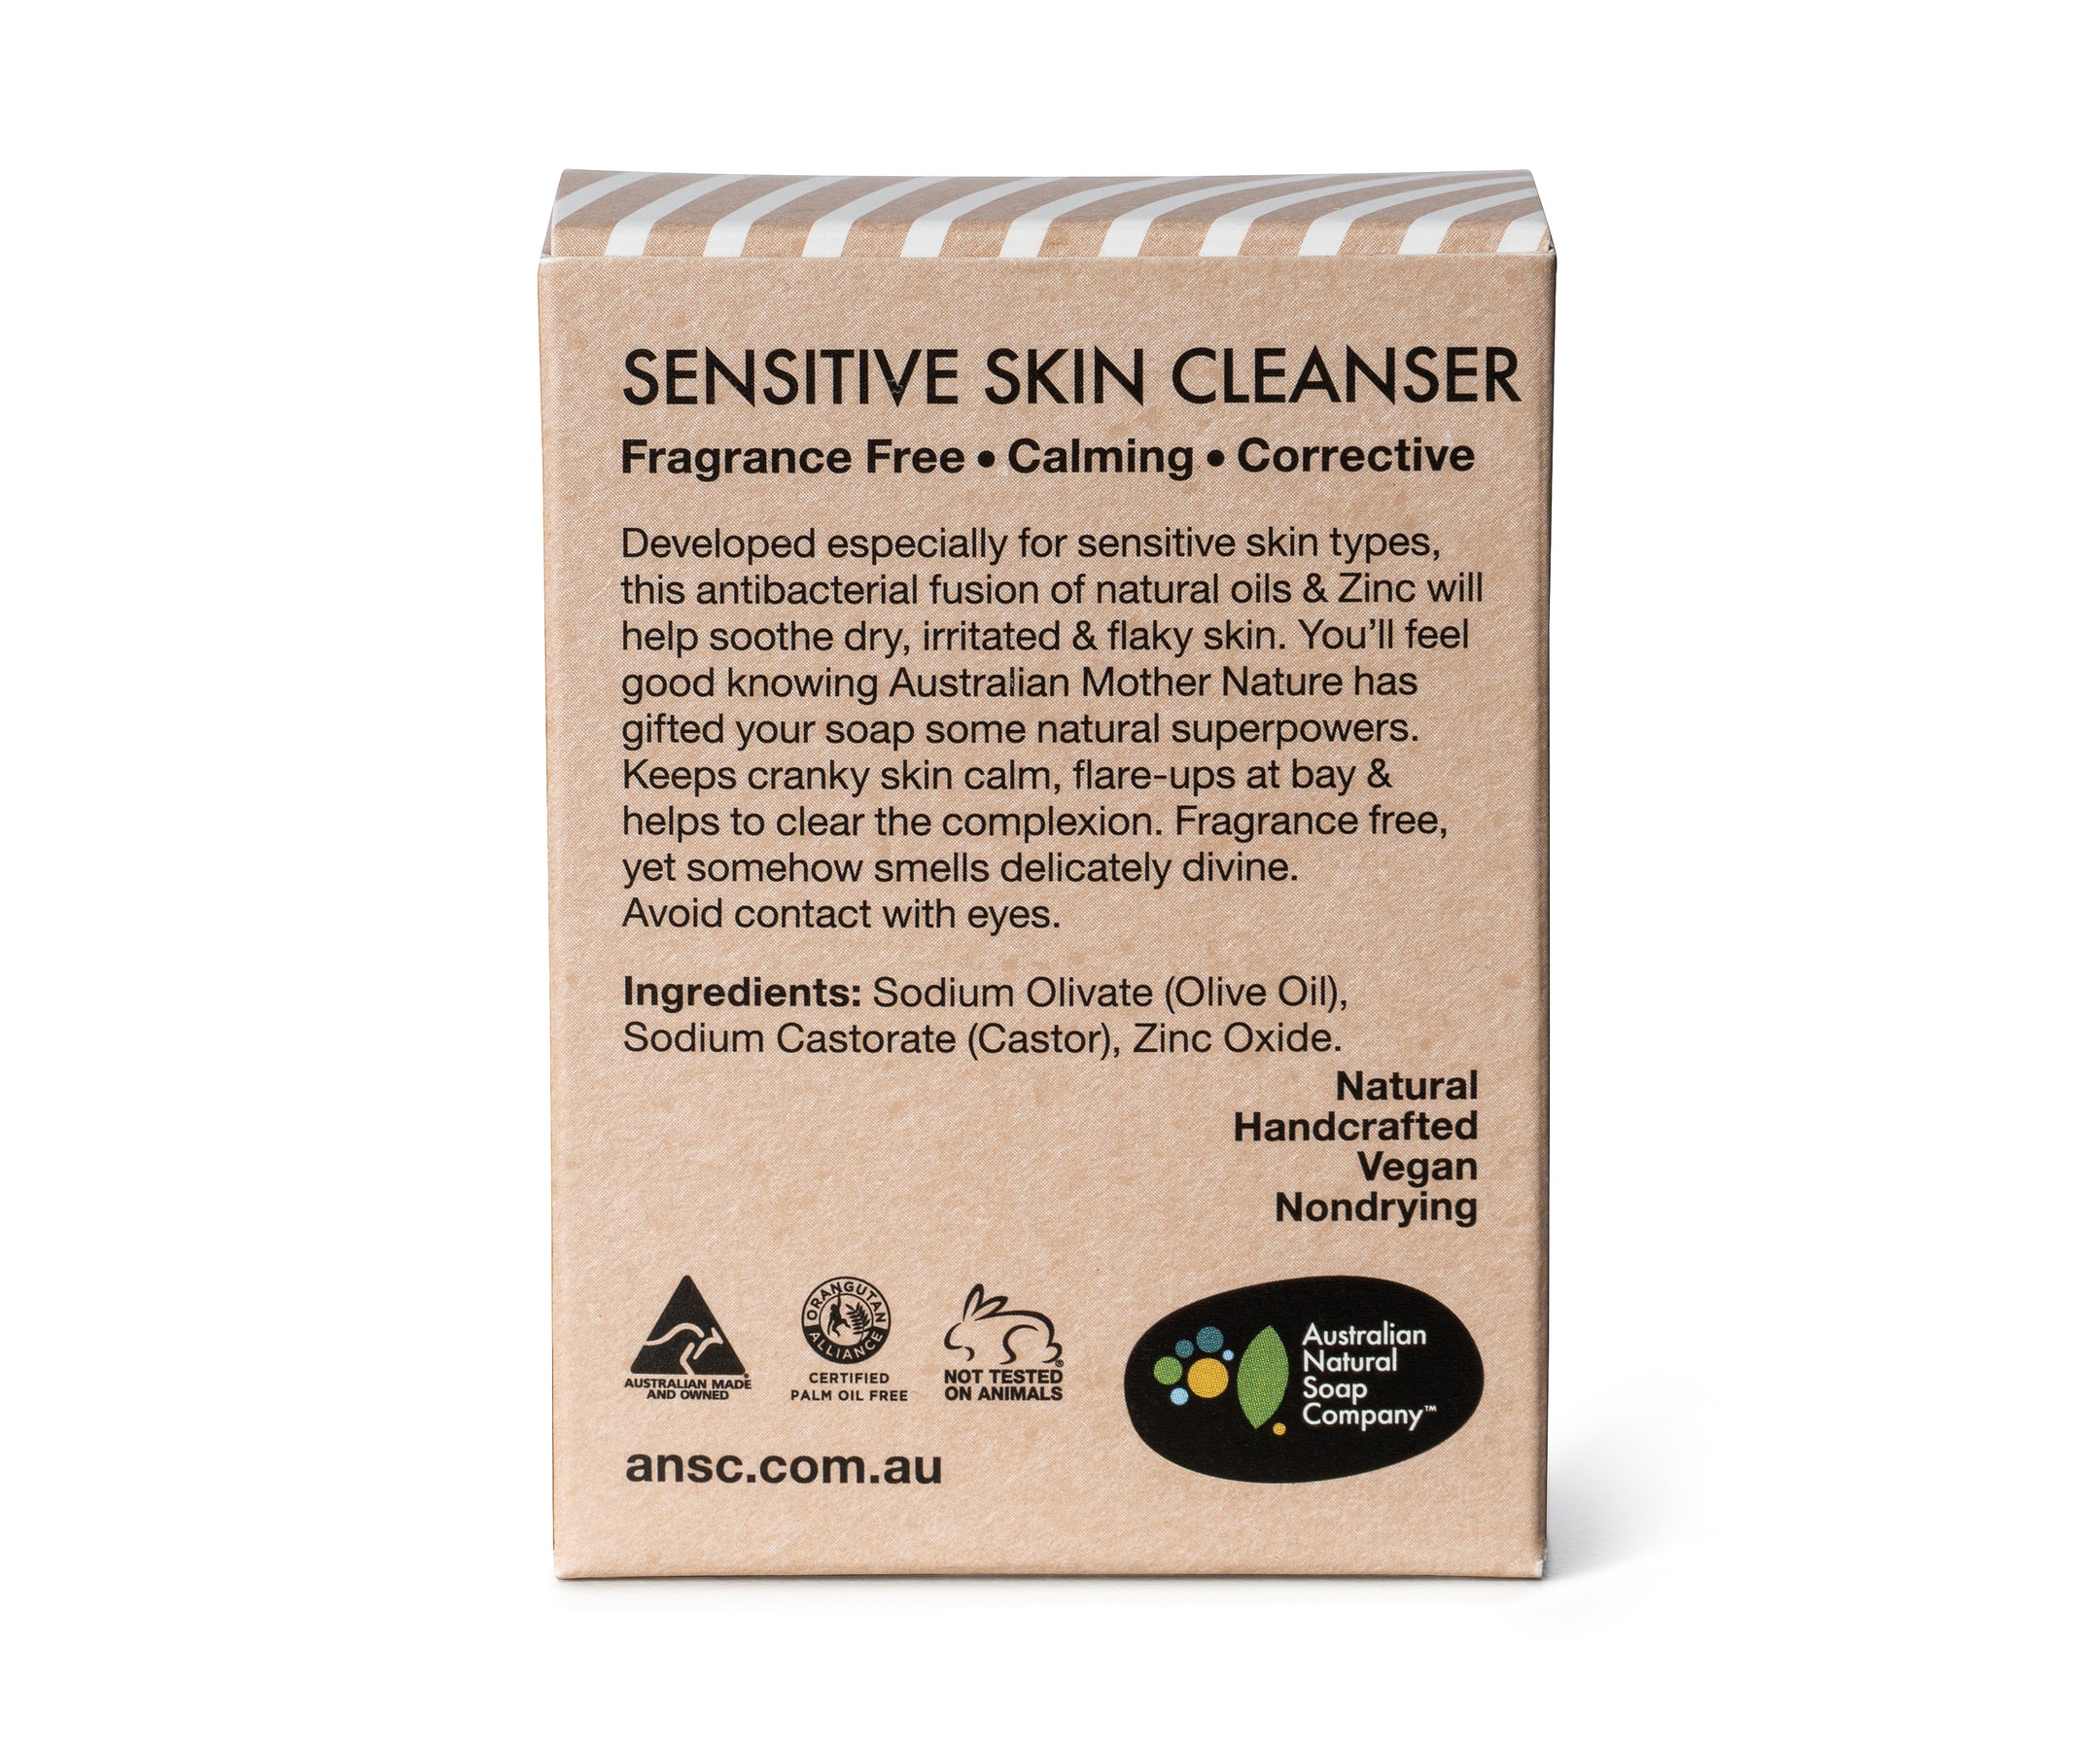 Australian Natural Soap Company sensitive skin face and body cleansing bar 100g back of box